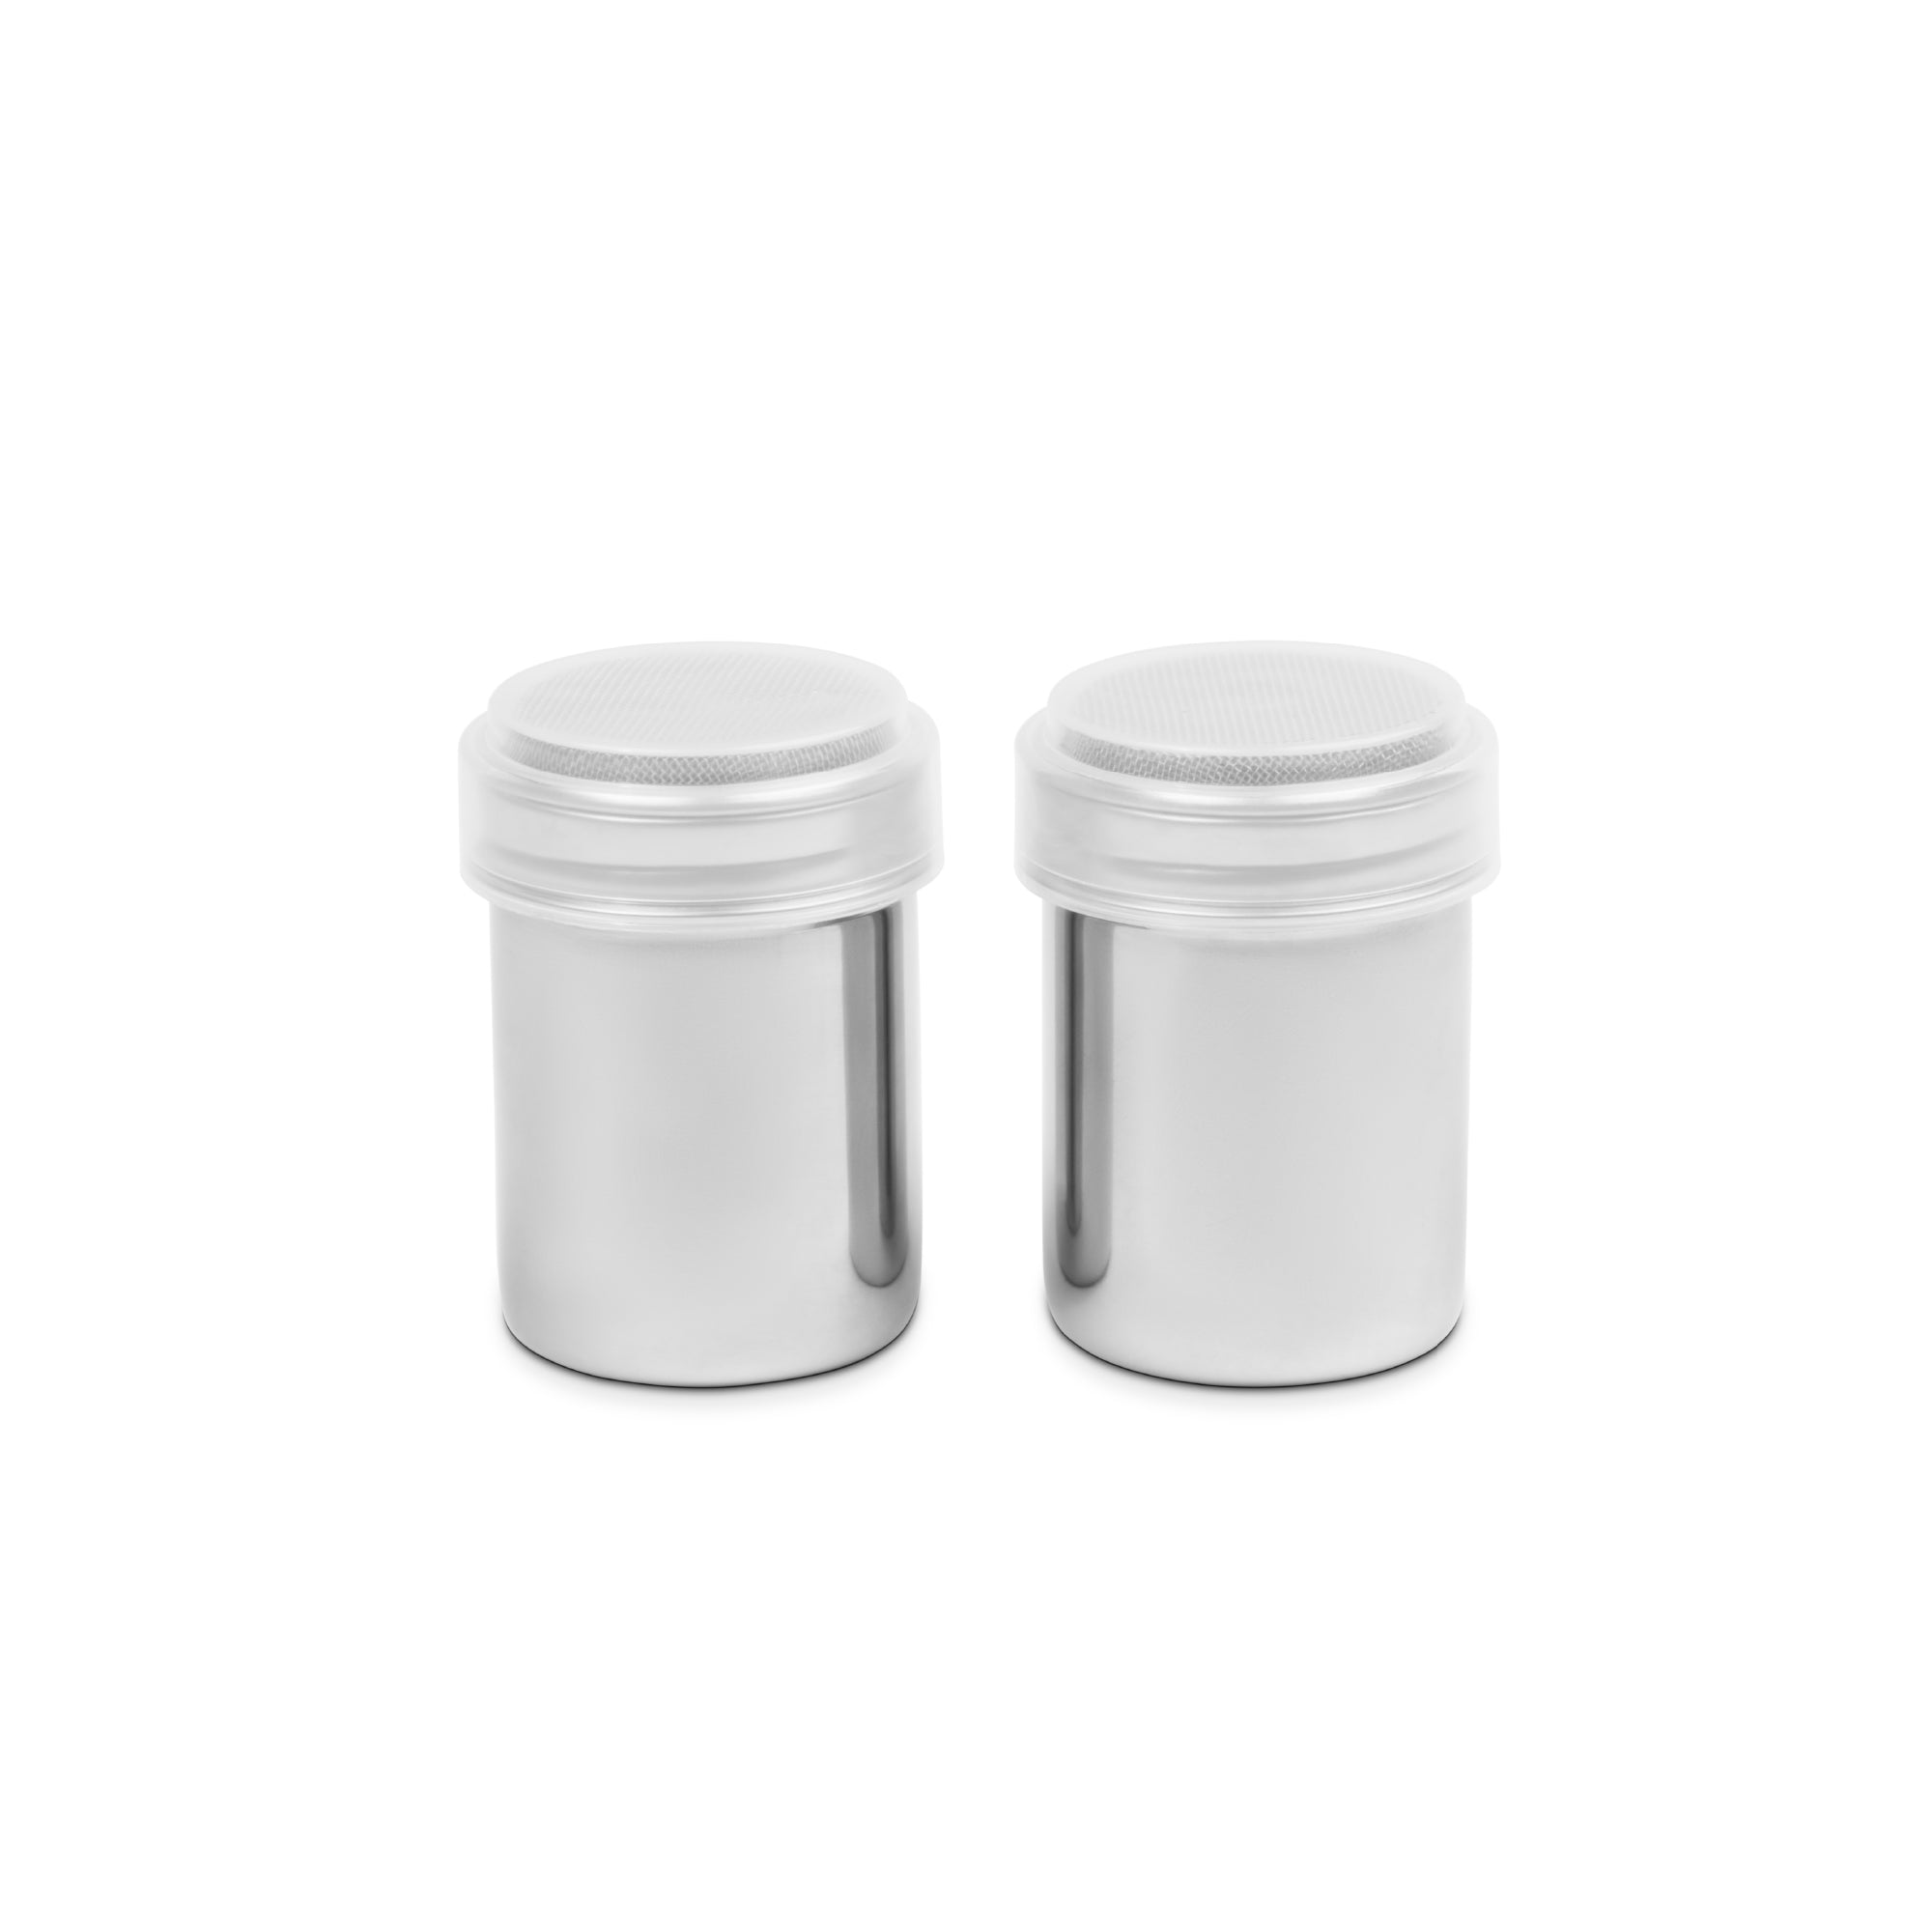  3 Pack Stainless Steel Powder Shaker, Coffee Cocoa